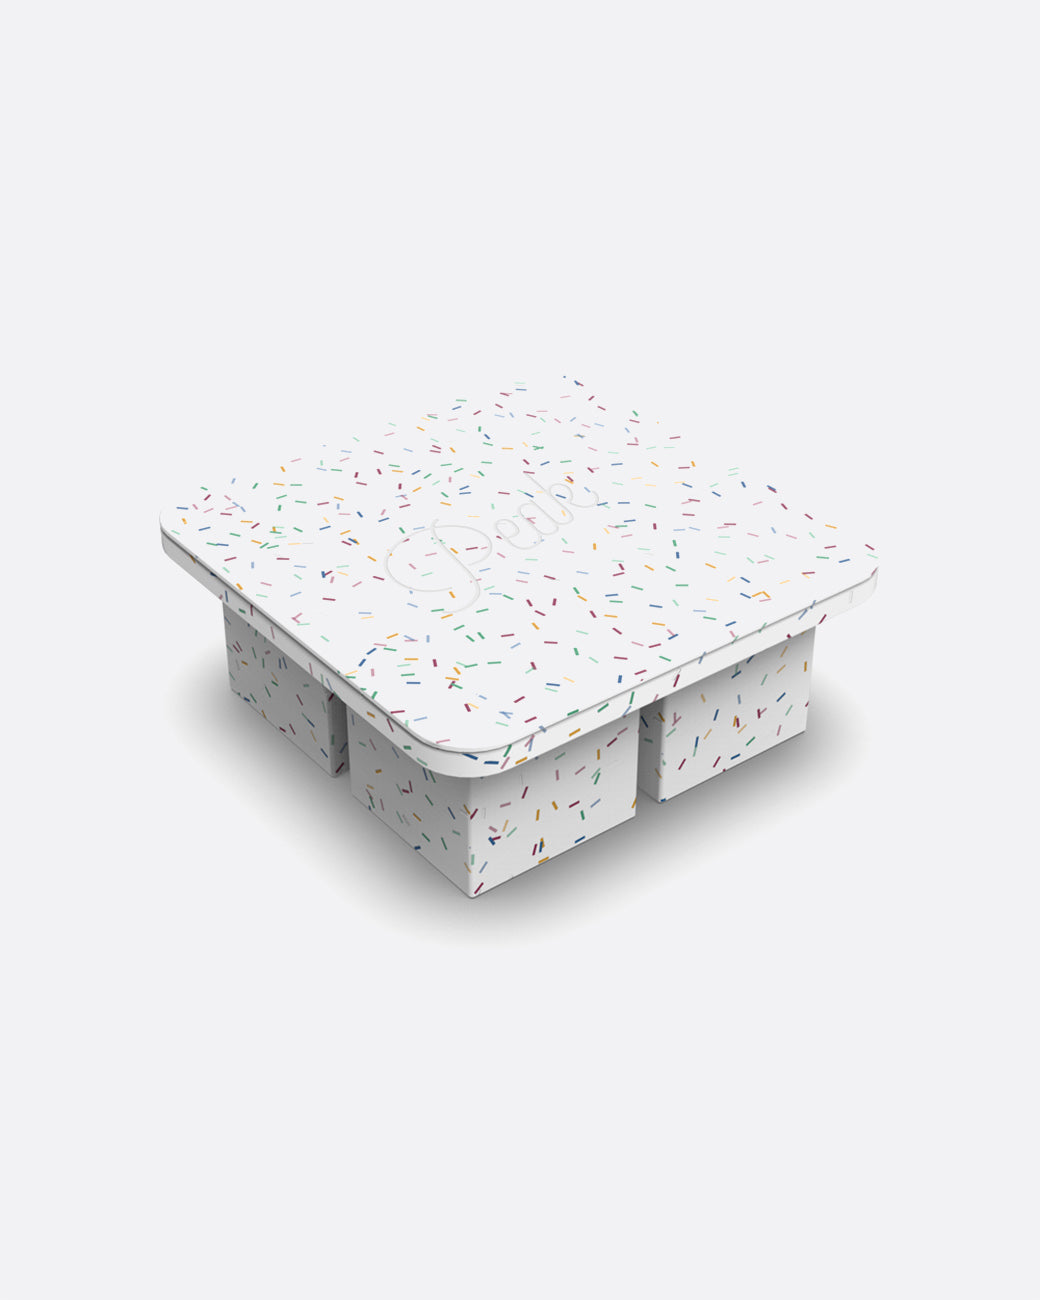 view of white tray with sprinkle dots on it